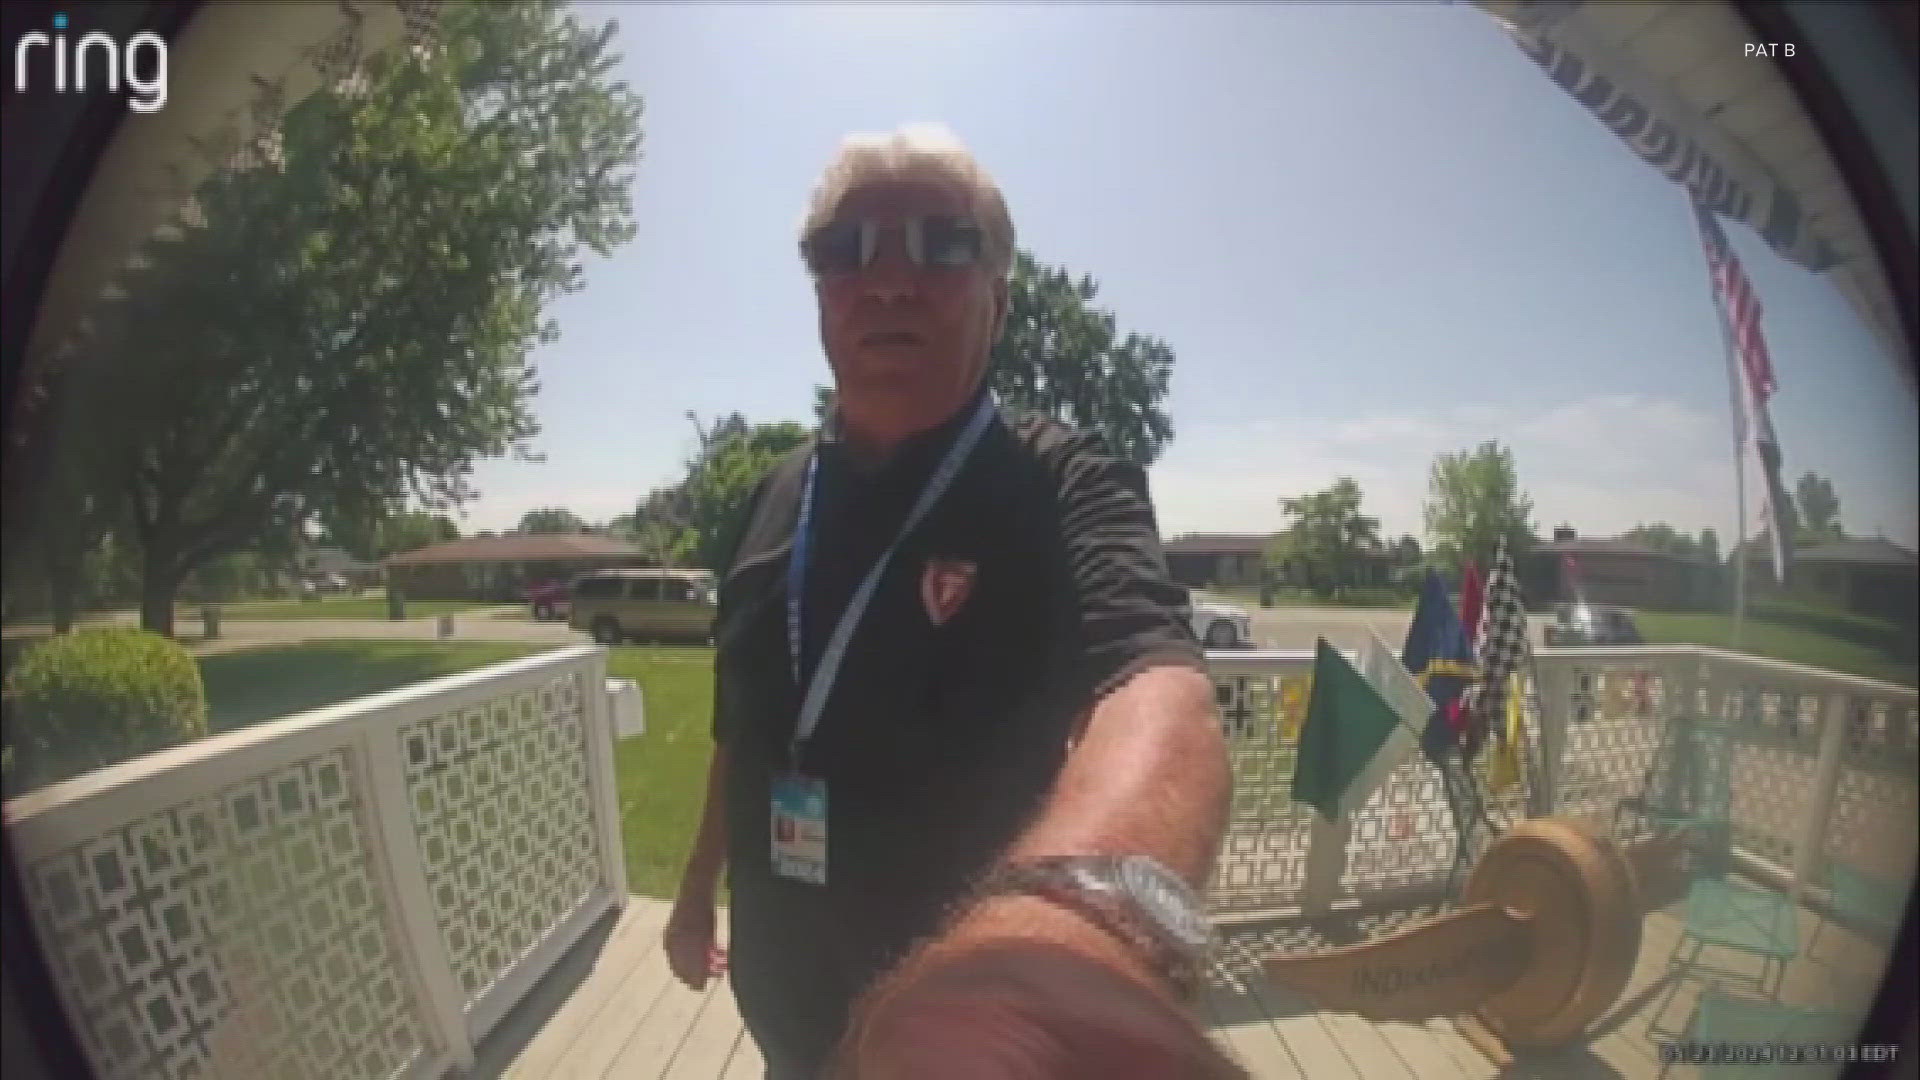 The fan missed the racing legend's visit, but it was captured on a security camera.